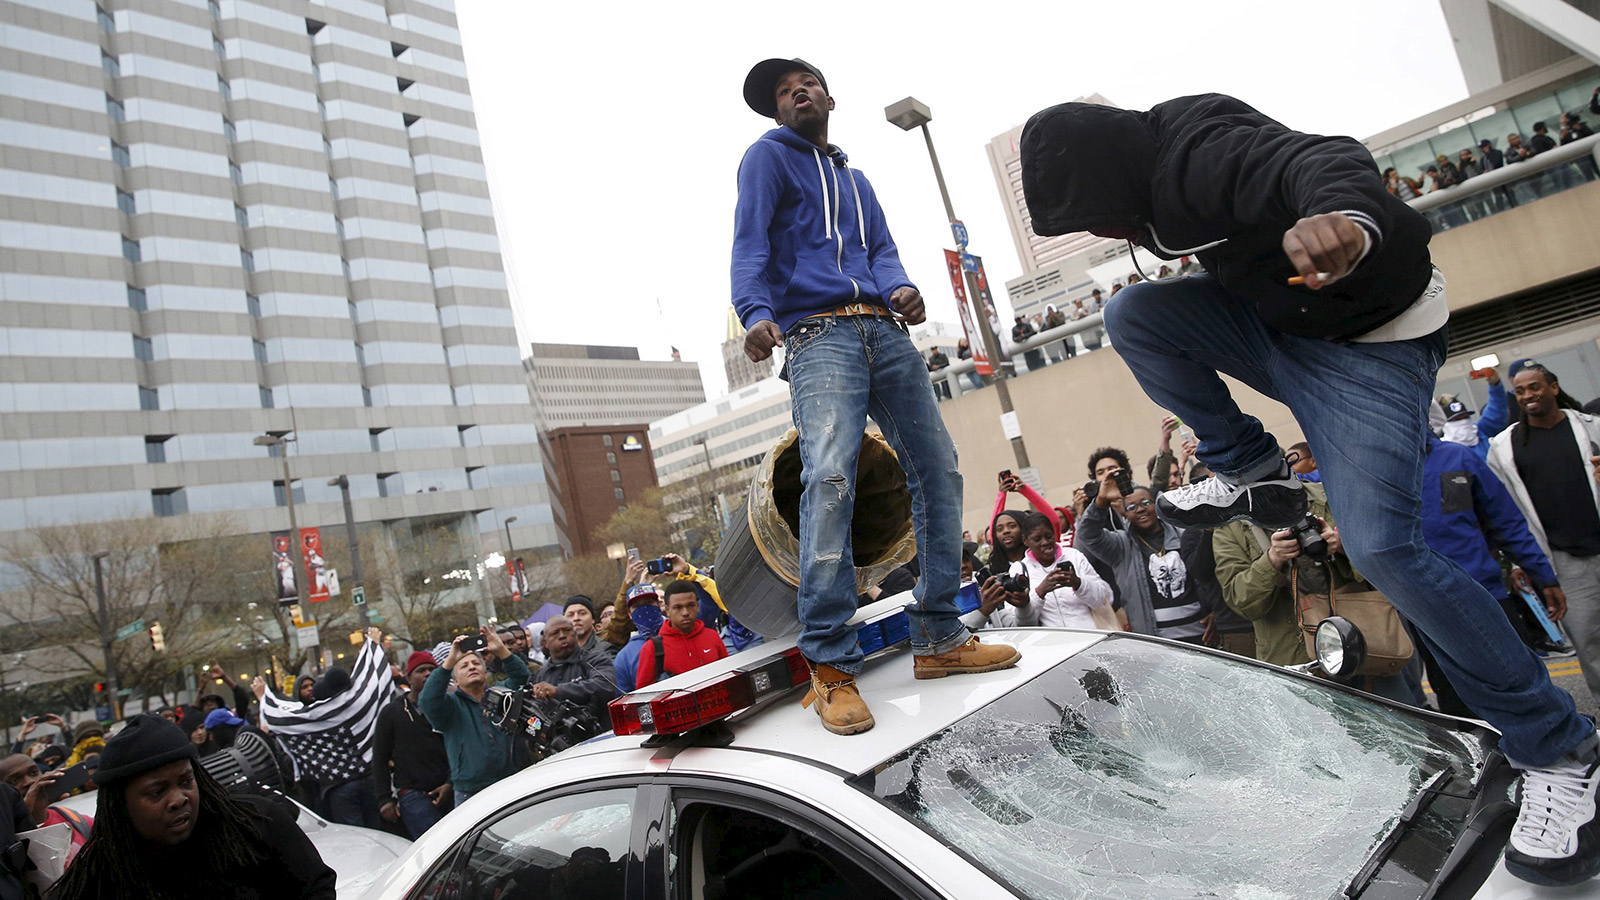 Protesters jump on a police car at a rally to protest the death of Freddie Gray who died following an arrest in Baltimore, Maryland April 25, 2015.